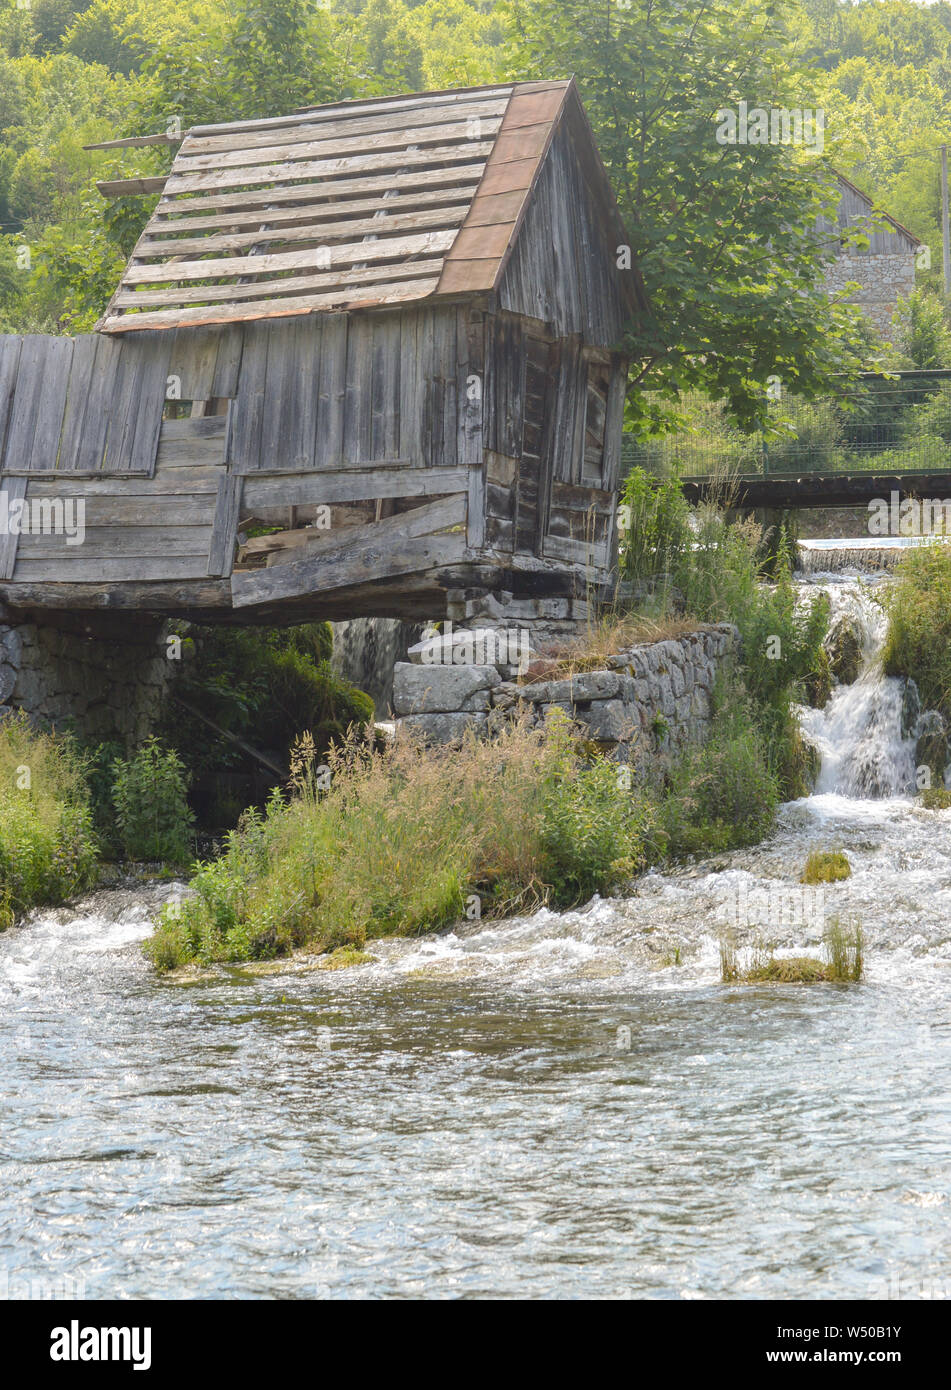 Old wooden mill on river Gacka springs Stock Photo